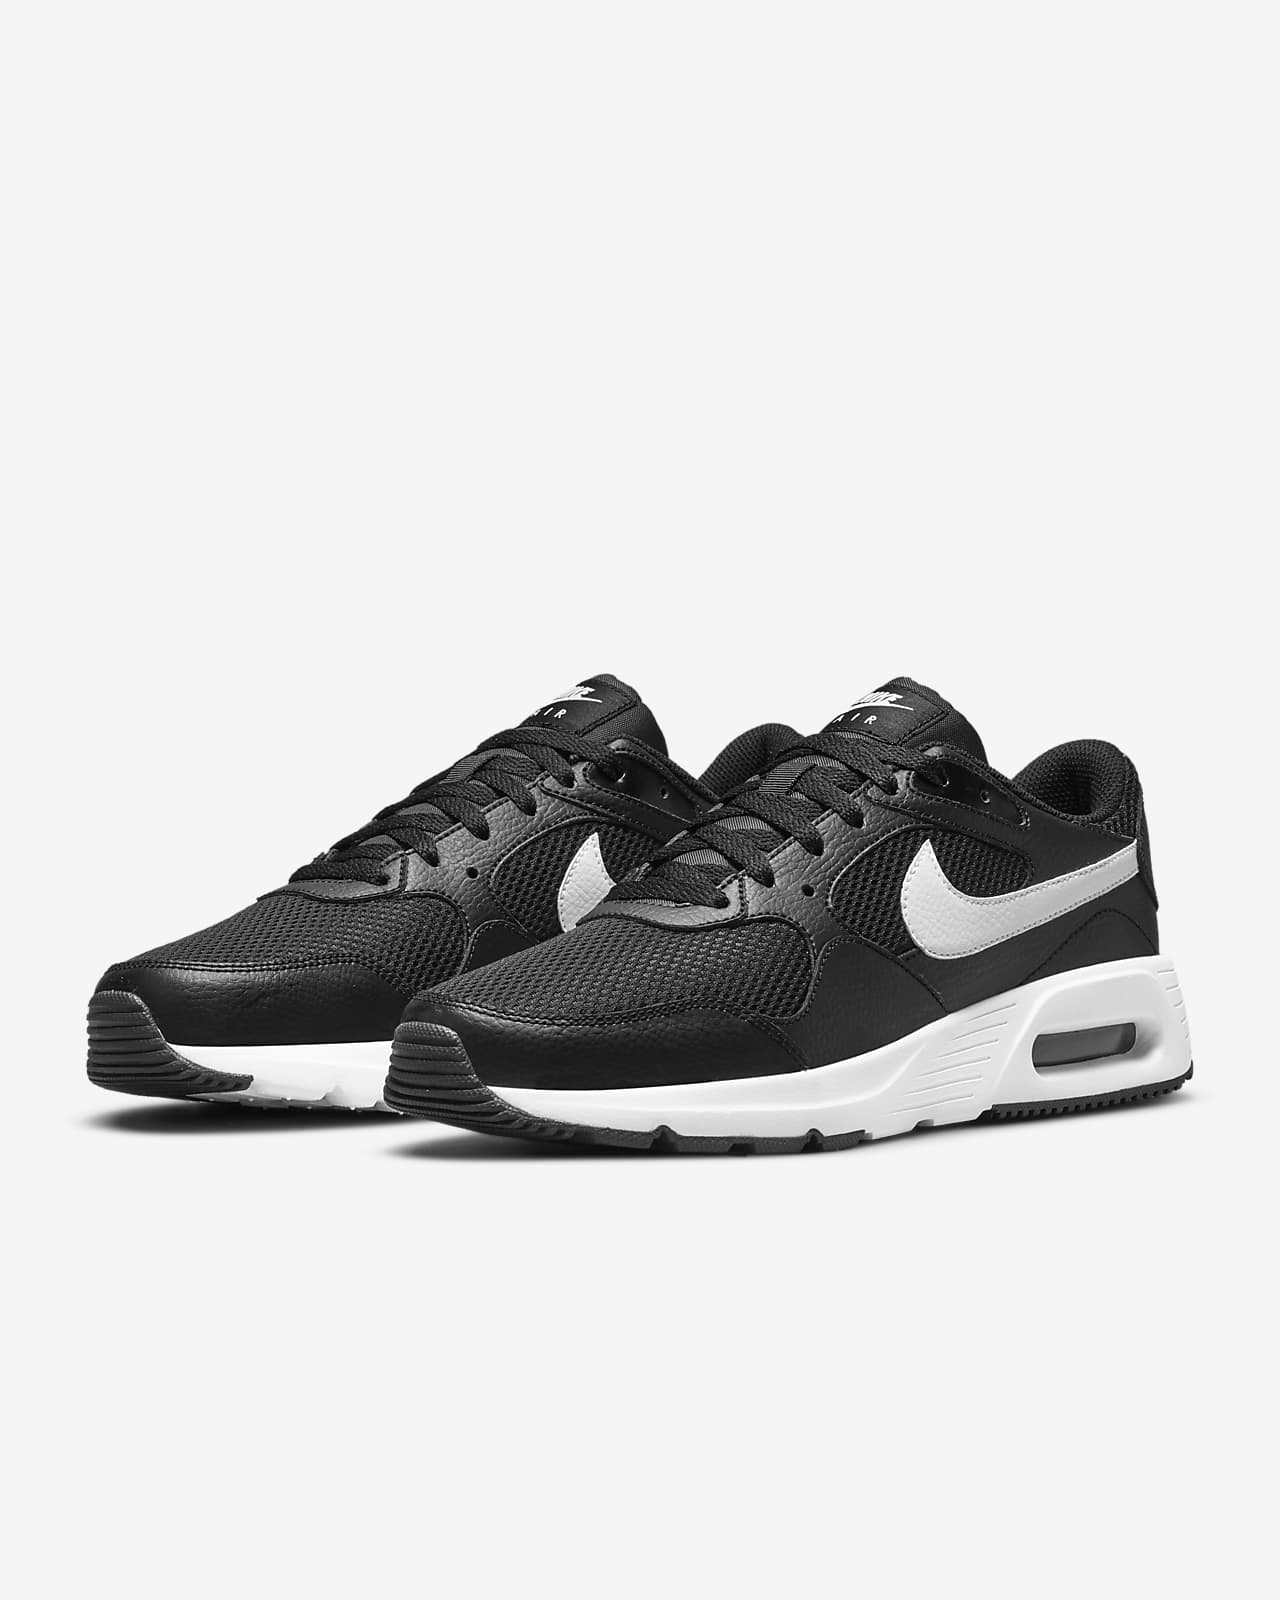 white and black nike air max shoes